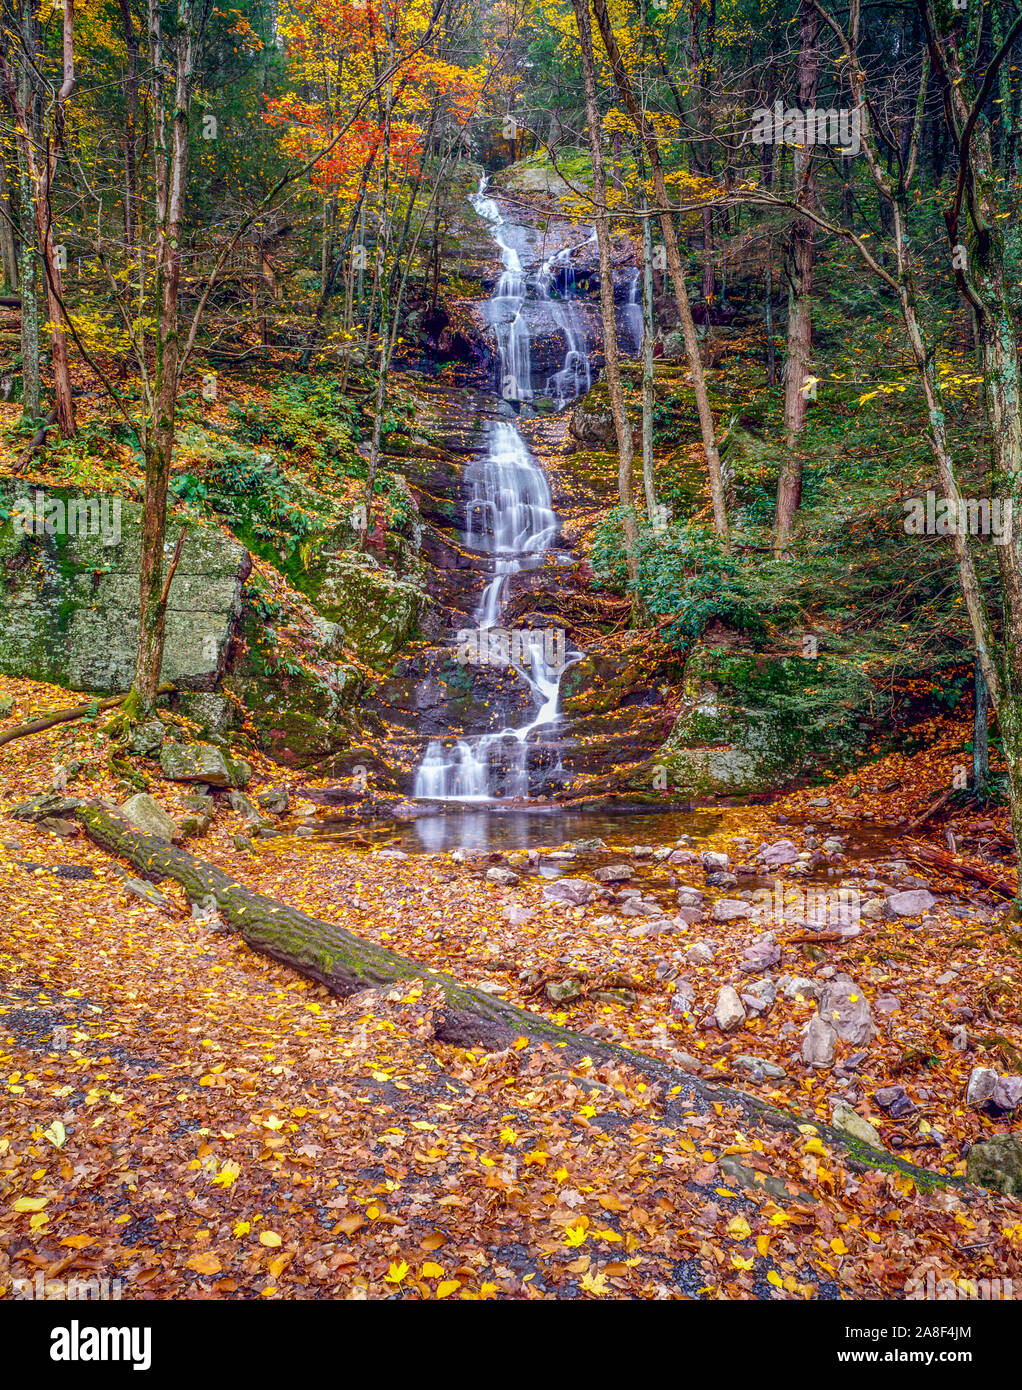 Buttrmilk tombe en automne, Delaware Water Gap National Recreation Area, New Jersey Banque D'Images